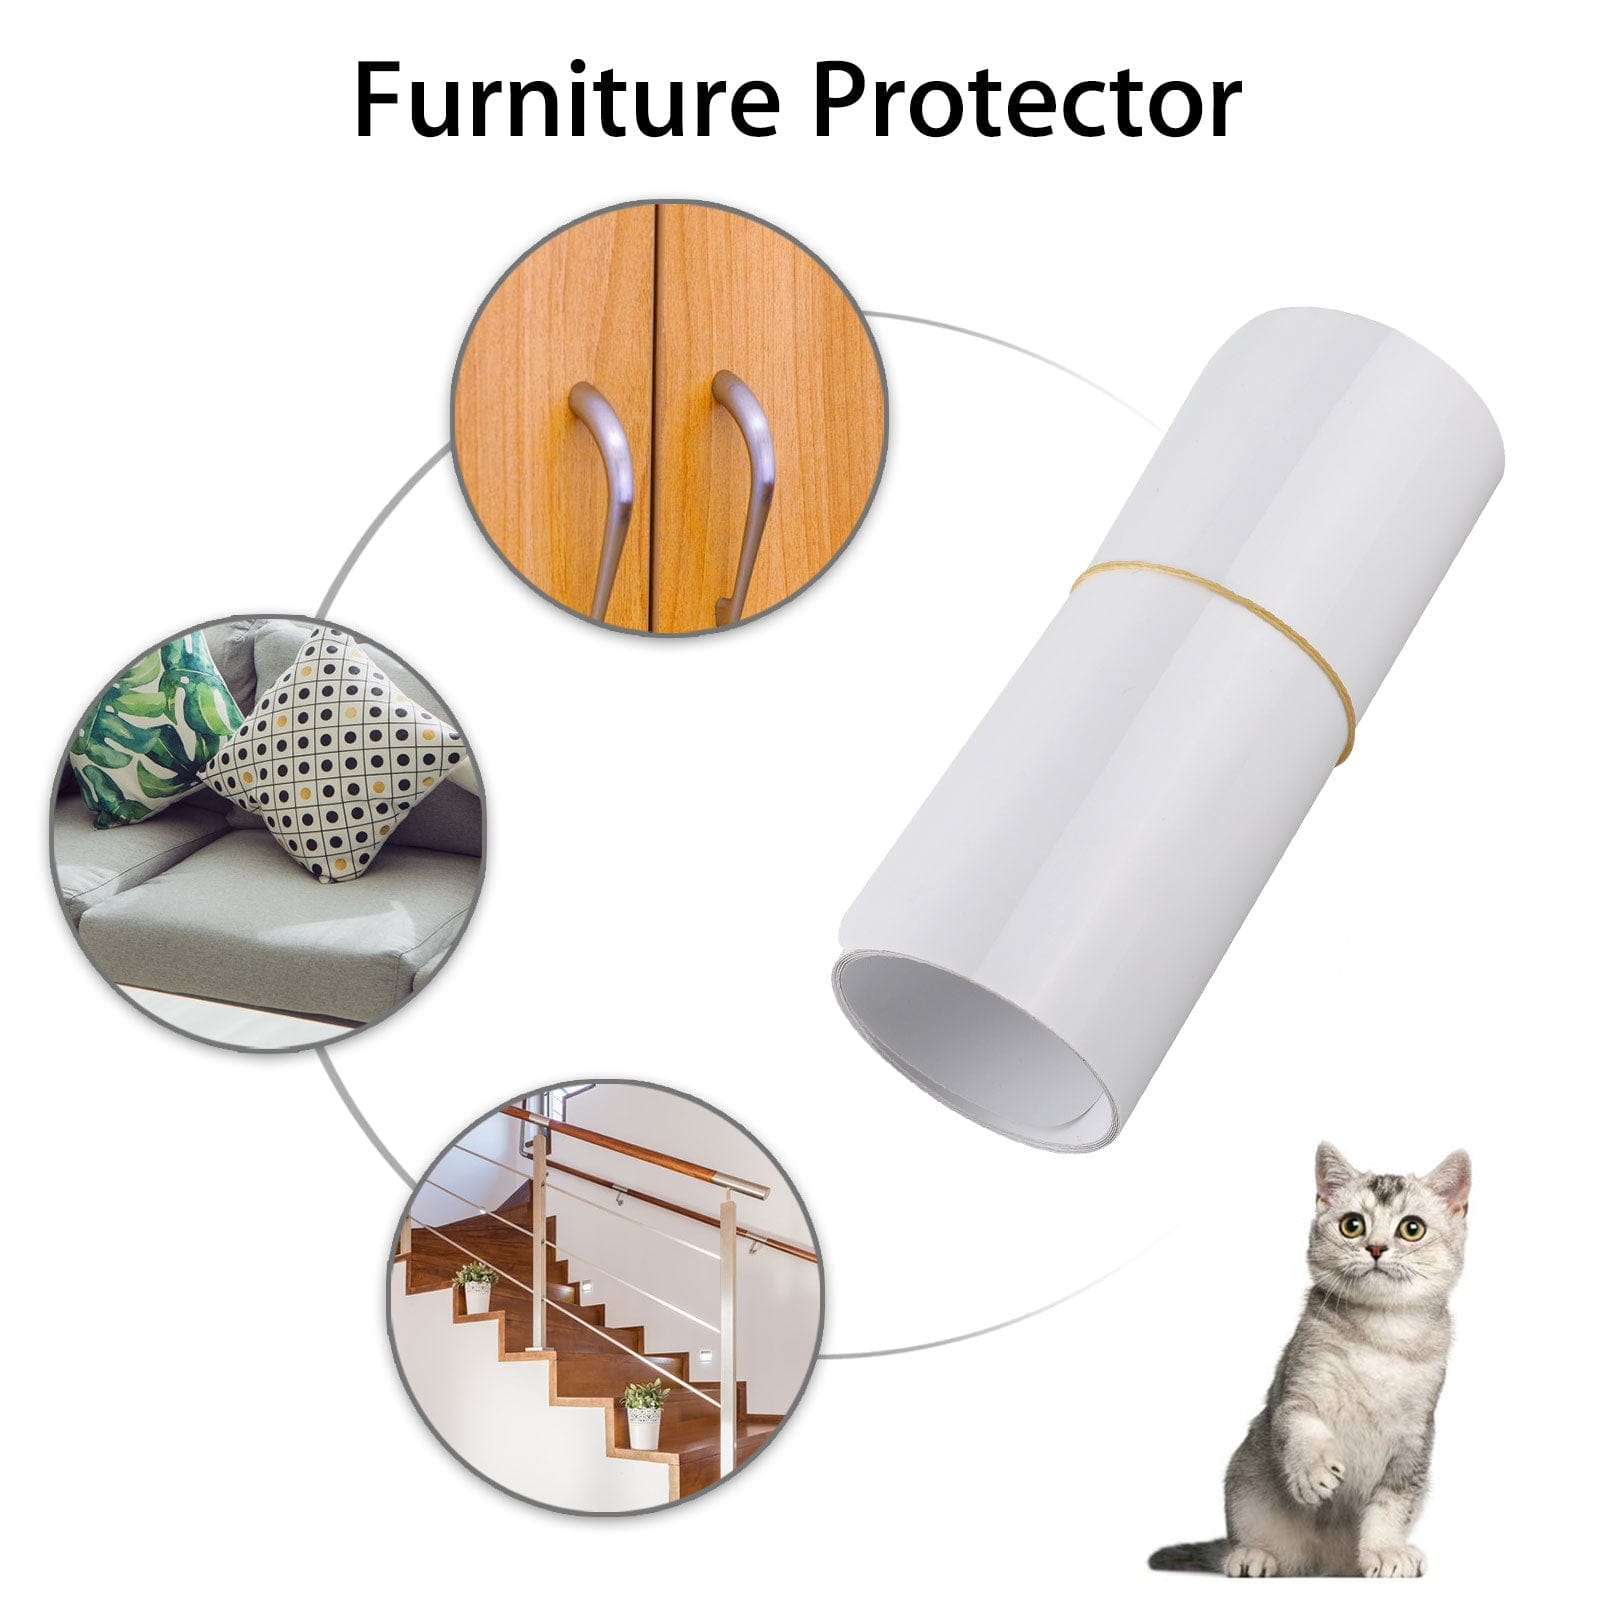 2-Pack Pet Cat Scratch Protector, Furniture & Sofa Shield for Dog & Cat Scratching Deterrent, Defender & Repellent Super Sticky Self-Adhesive Backing